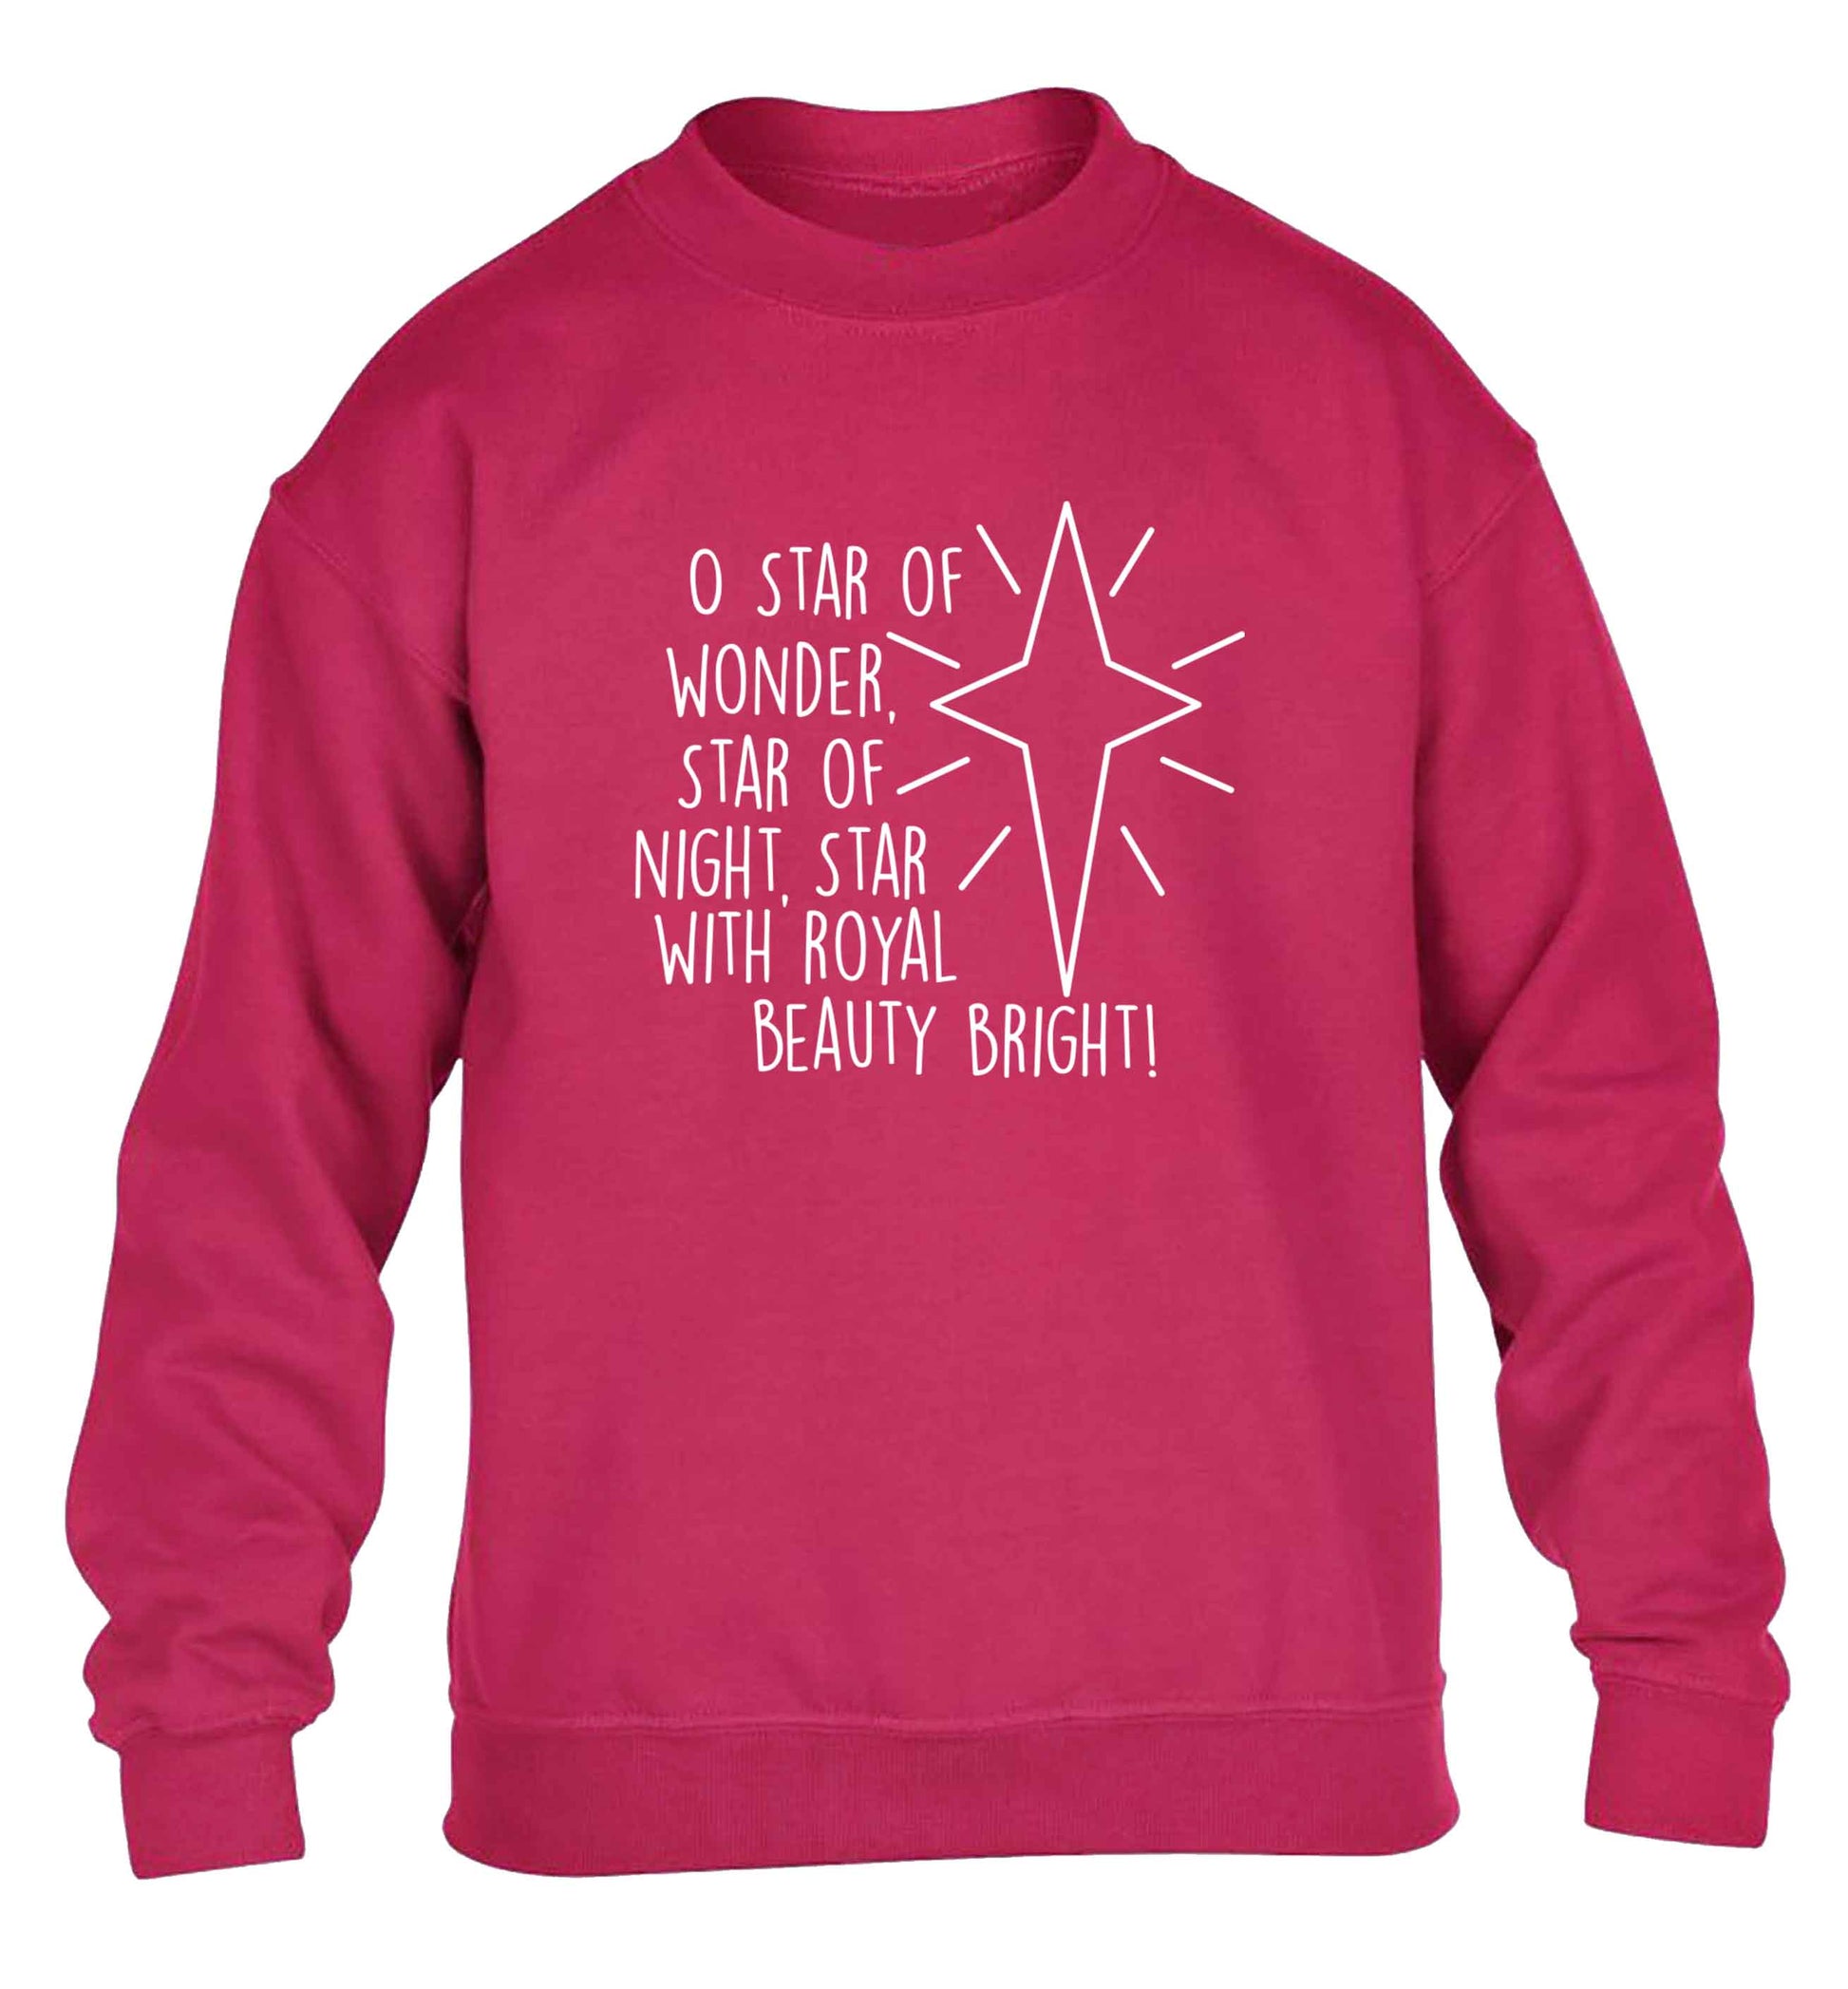 Oh star of wonder star of night, star with royal beauty bright children's pink sweater 12-13 Years